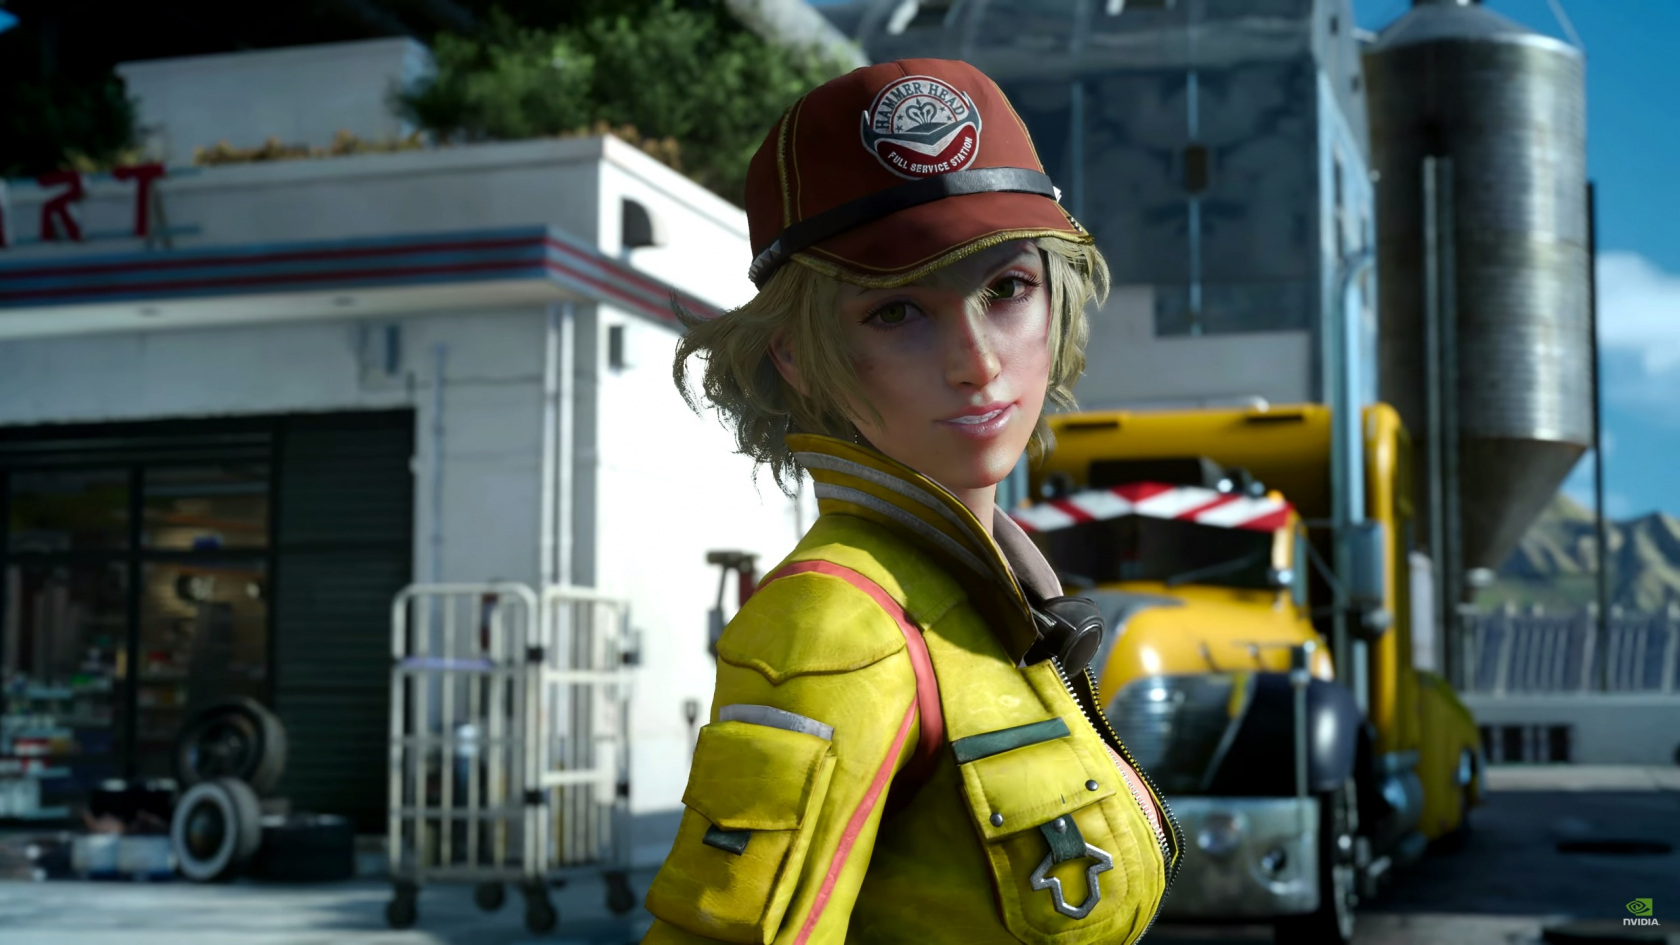 The PC version of Final Fantasy XV will reportedly take up 170GB of drive space (updated)